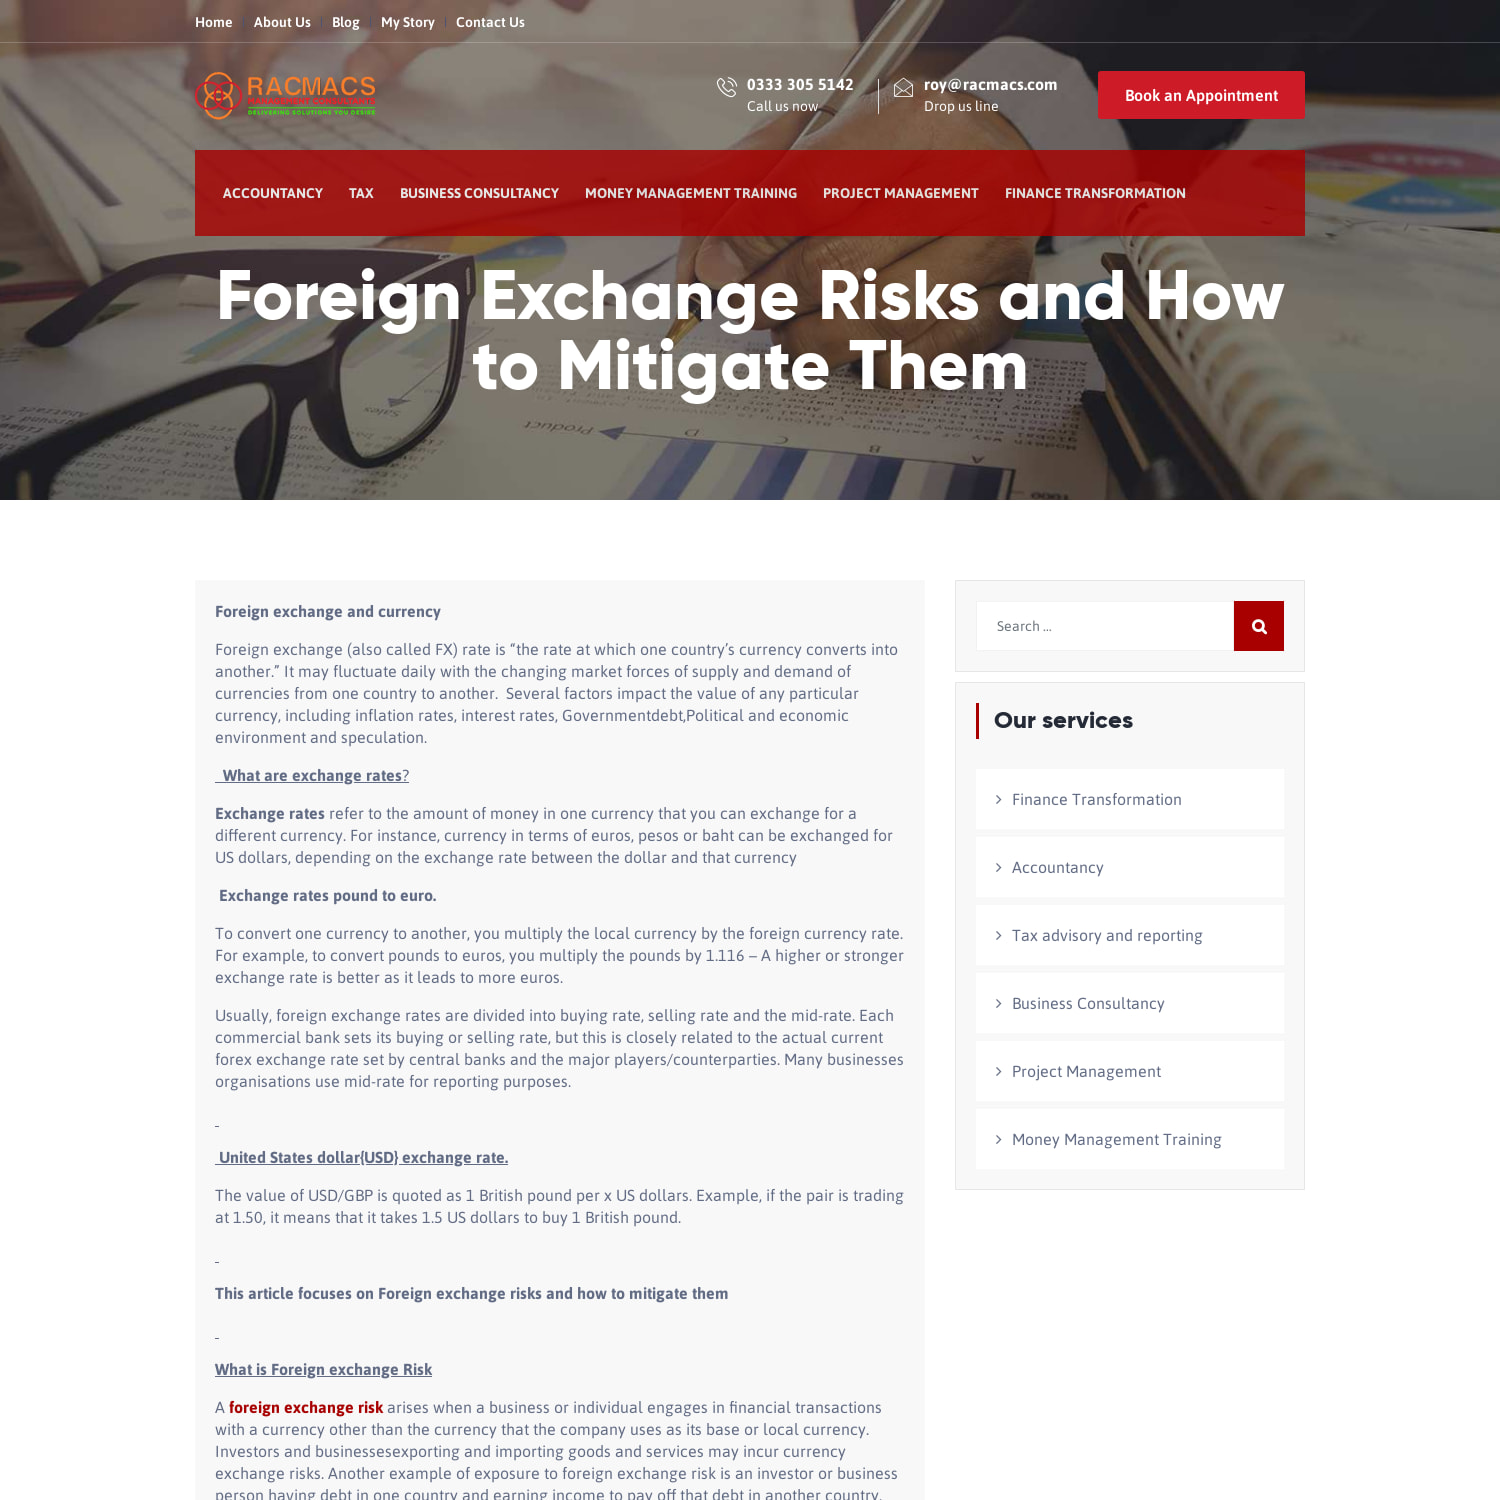 Foreign Exchange Risks and How to Mitigate Them